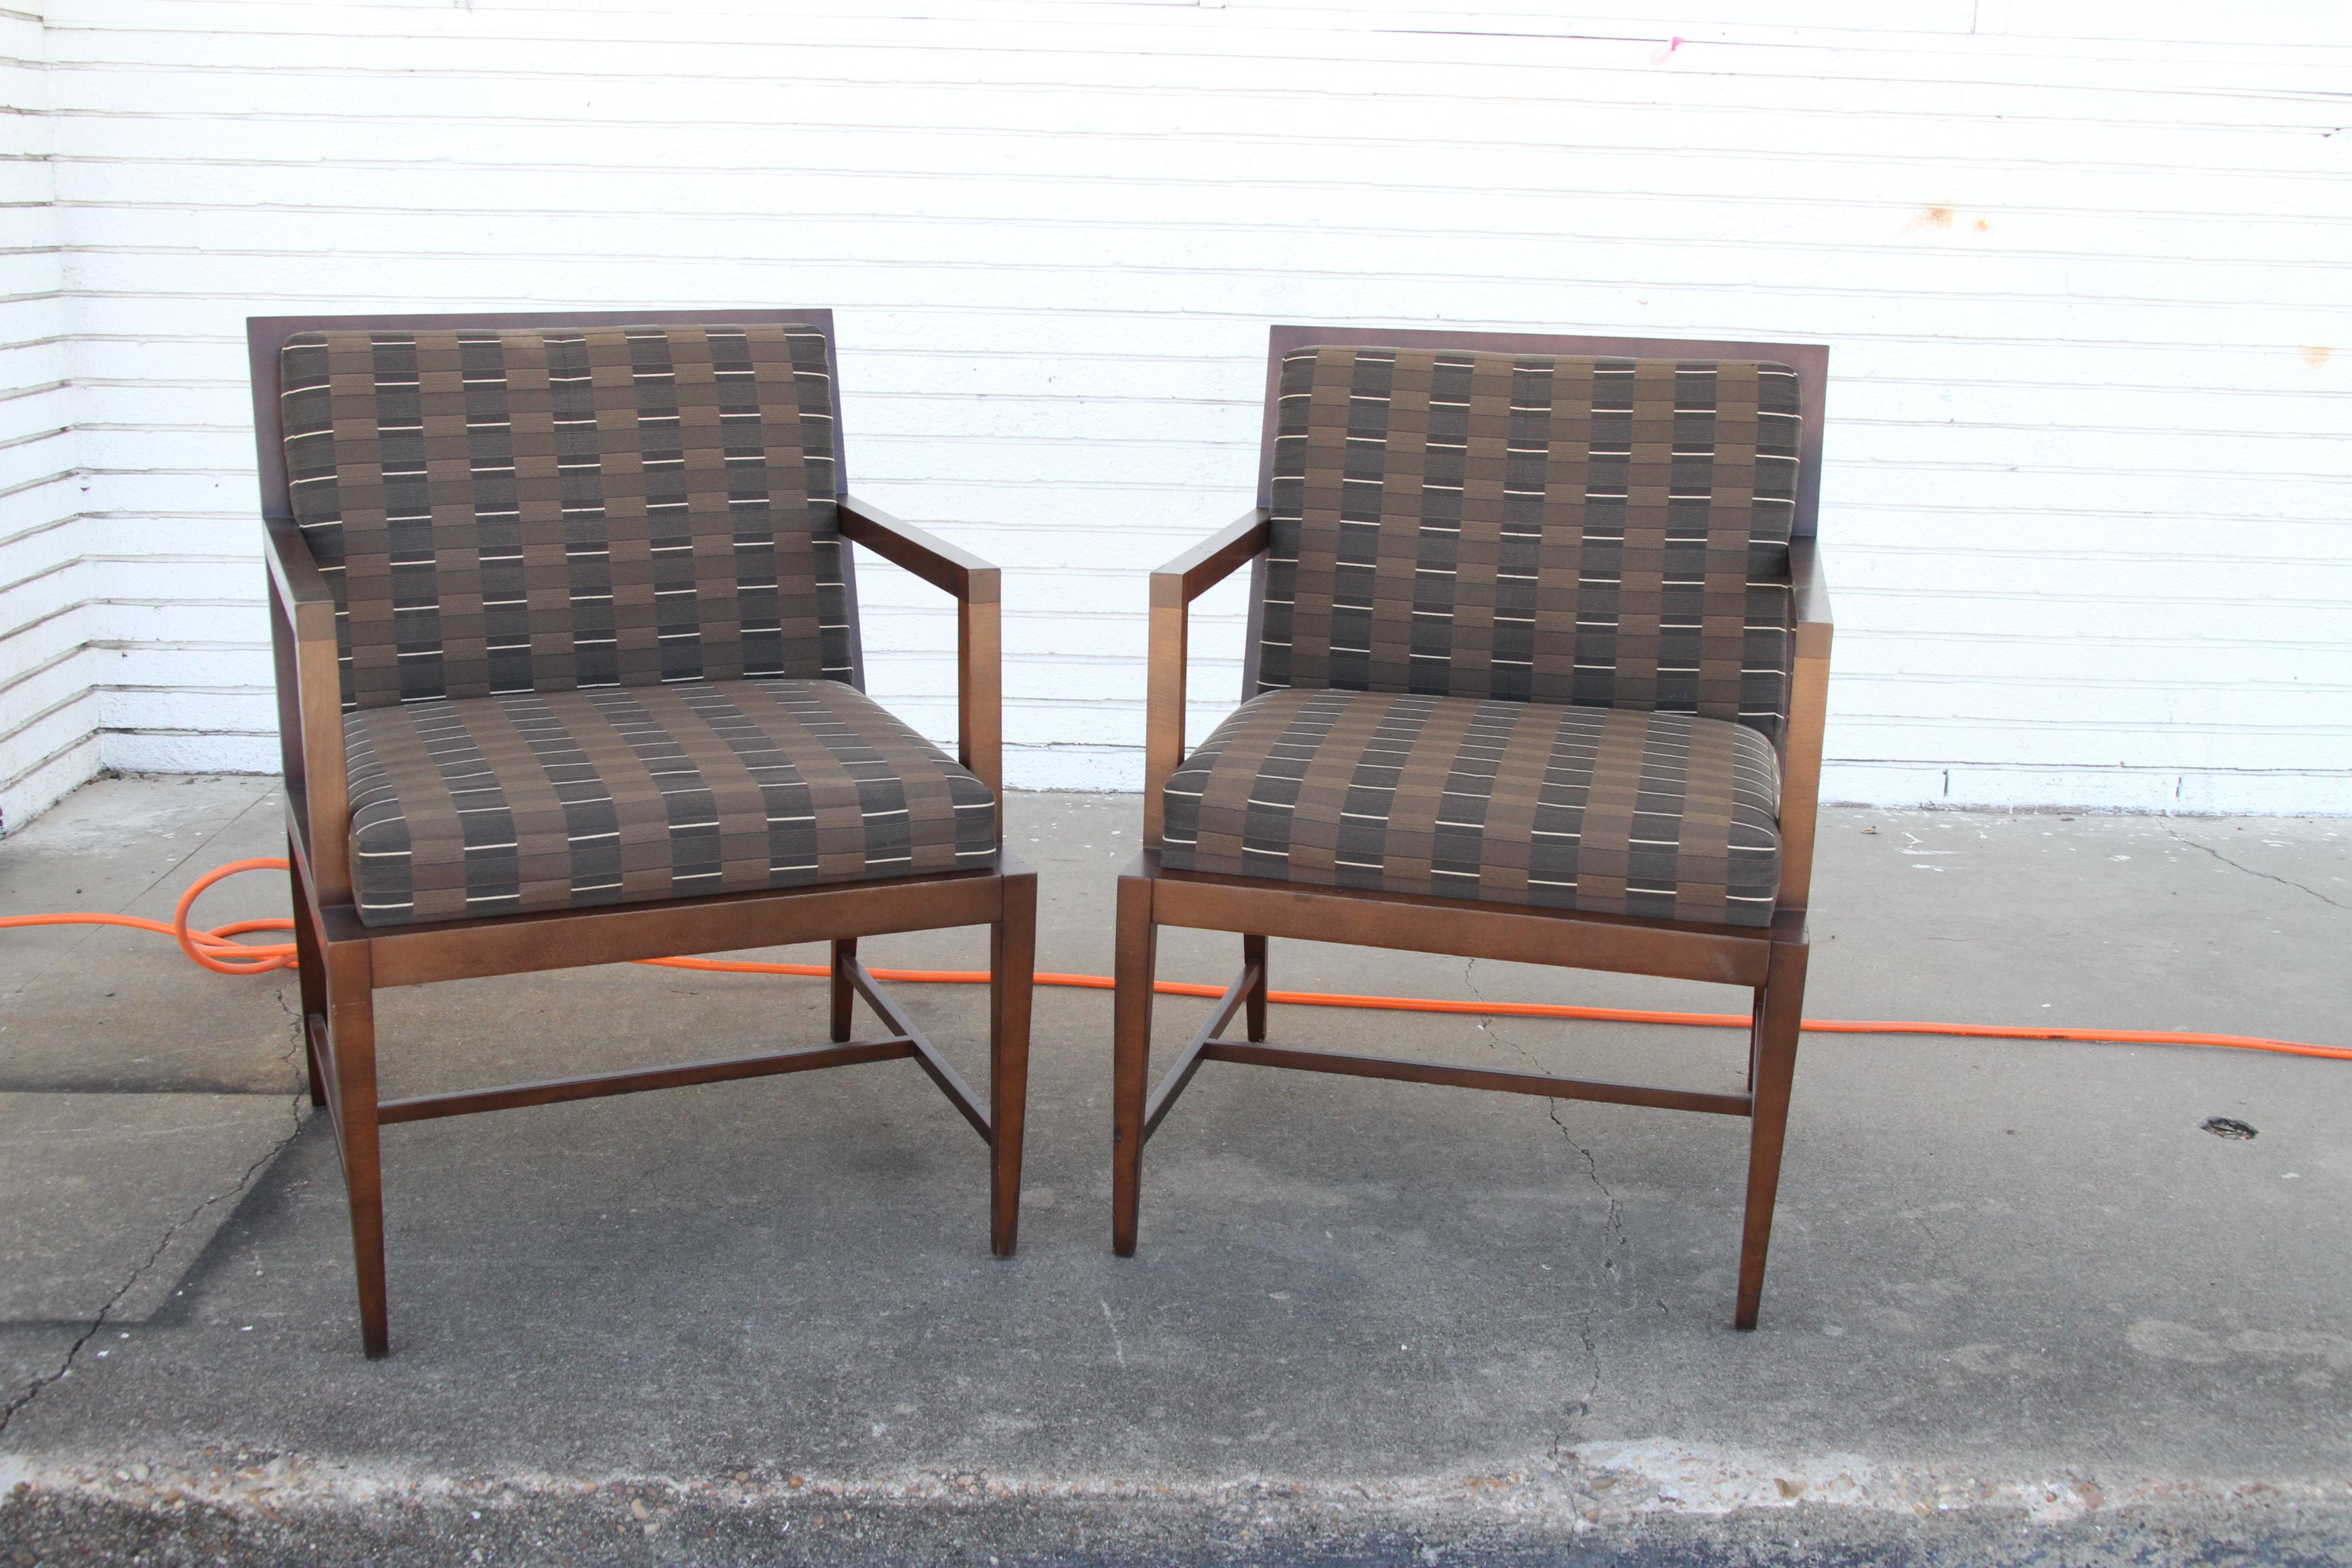 Pair of guest or dining armchairs by Hickory Furniture.
Walnut with modern geometric print. MFG label. Gently used.

Dimensions: height 33